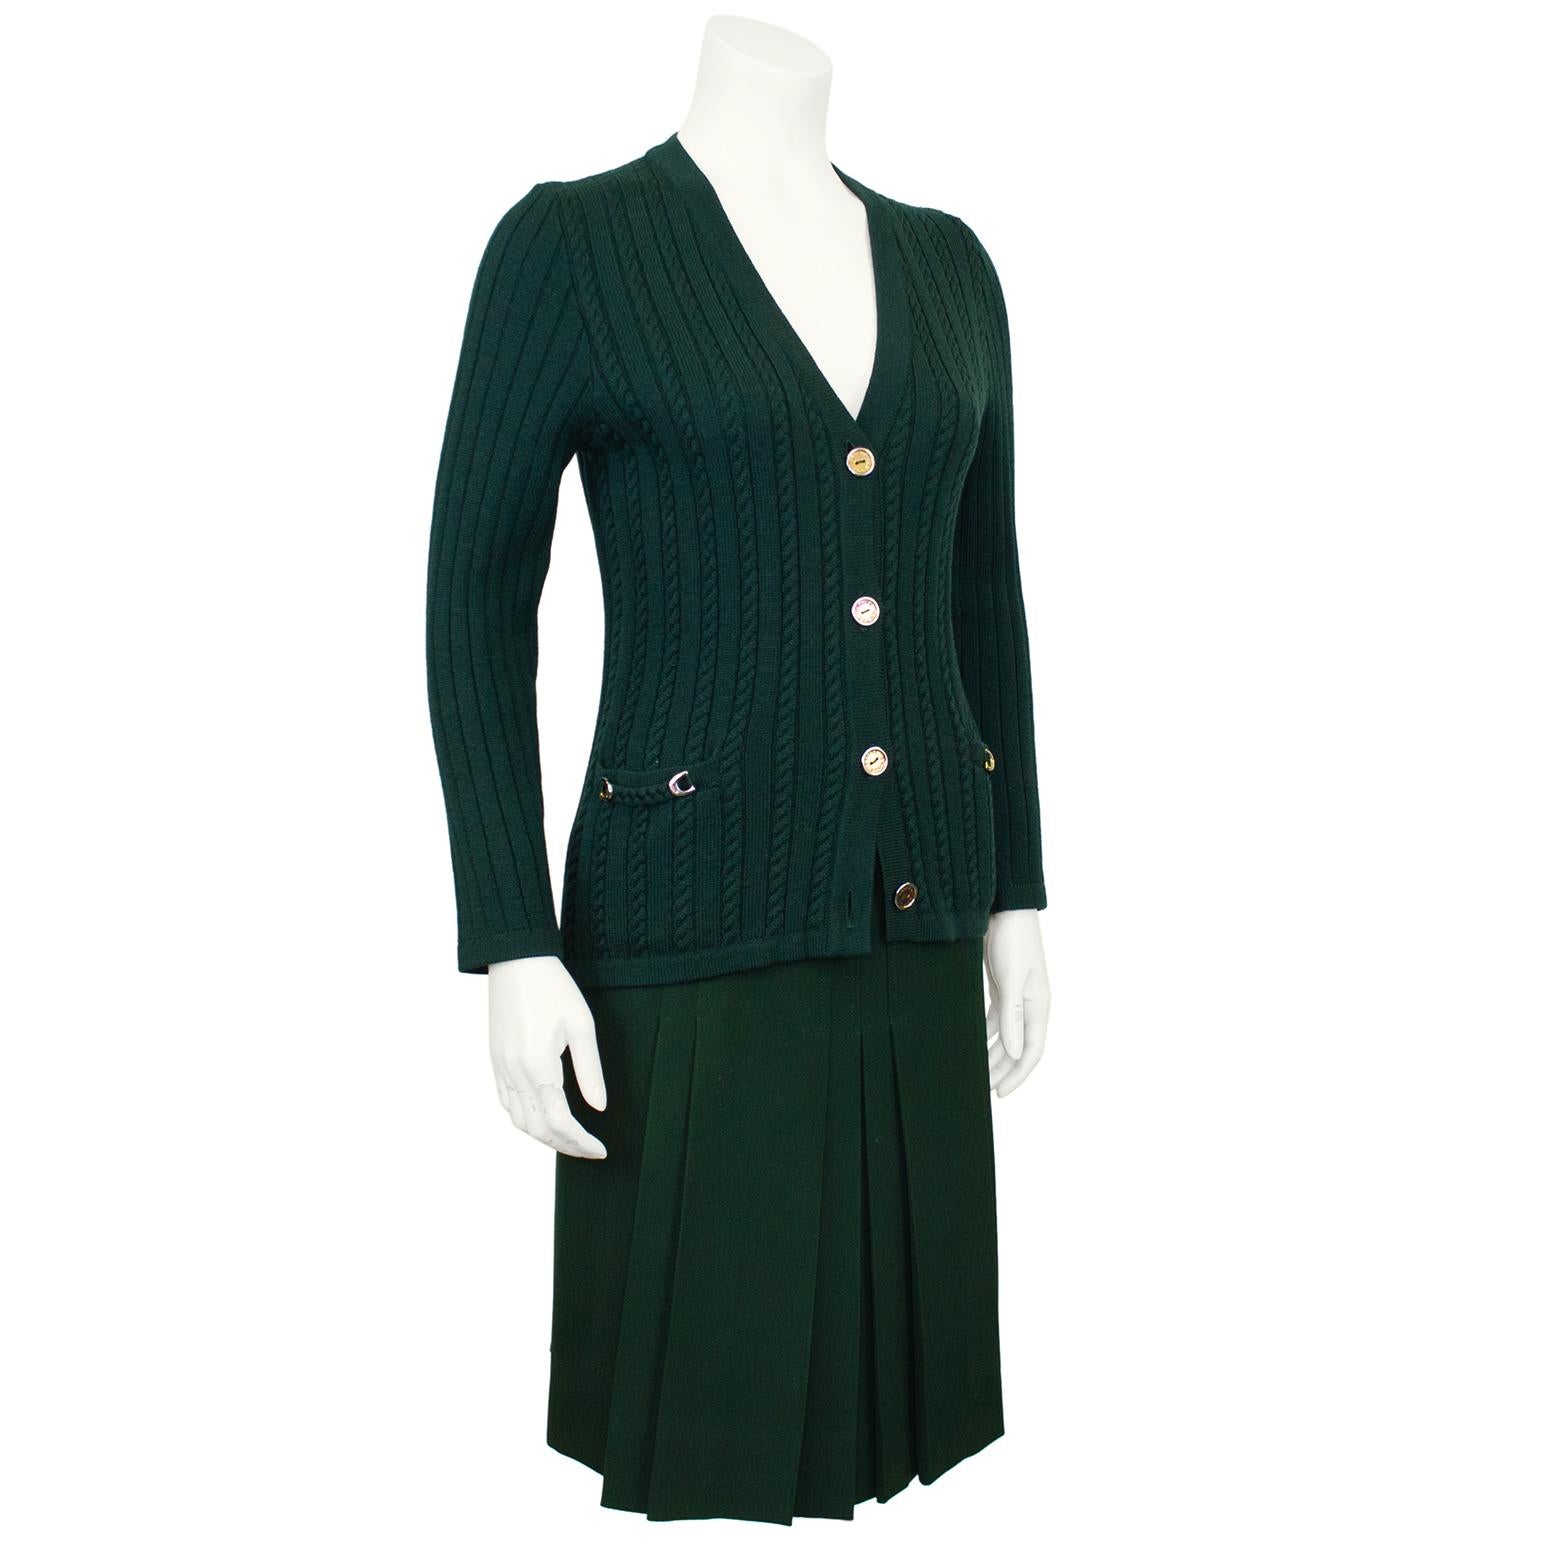 Classic and timeless Celine 100% wool forest green cardigan and gabardine skirt ensemble from the 1970's. The set features a cable knit v neck cardigan with gold tone metal accents. Slit pockets at the hips with horse bit details. The pleated skirt